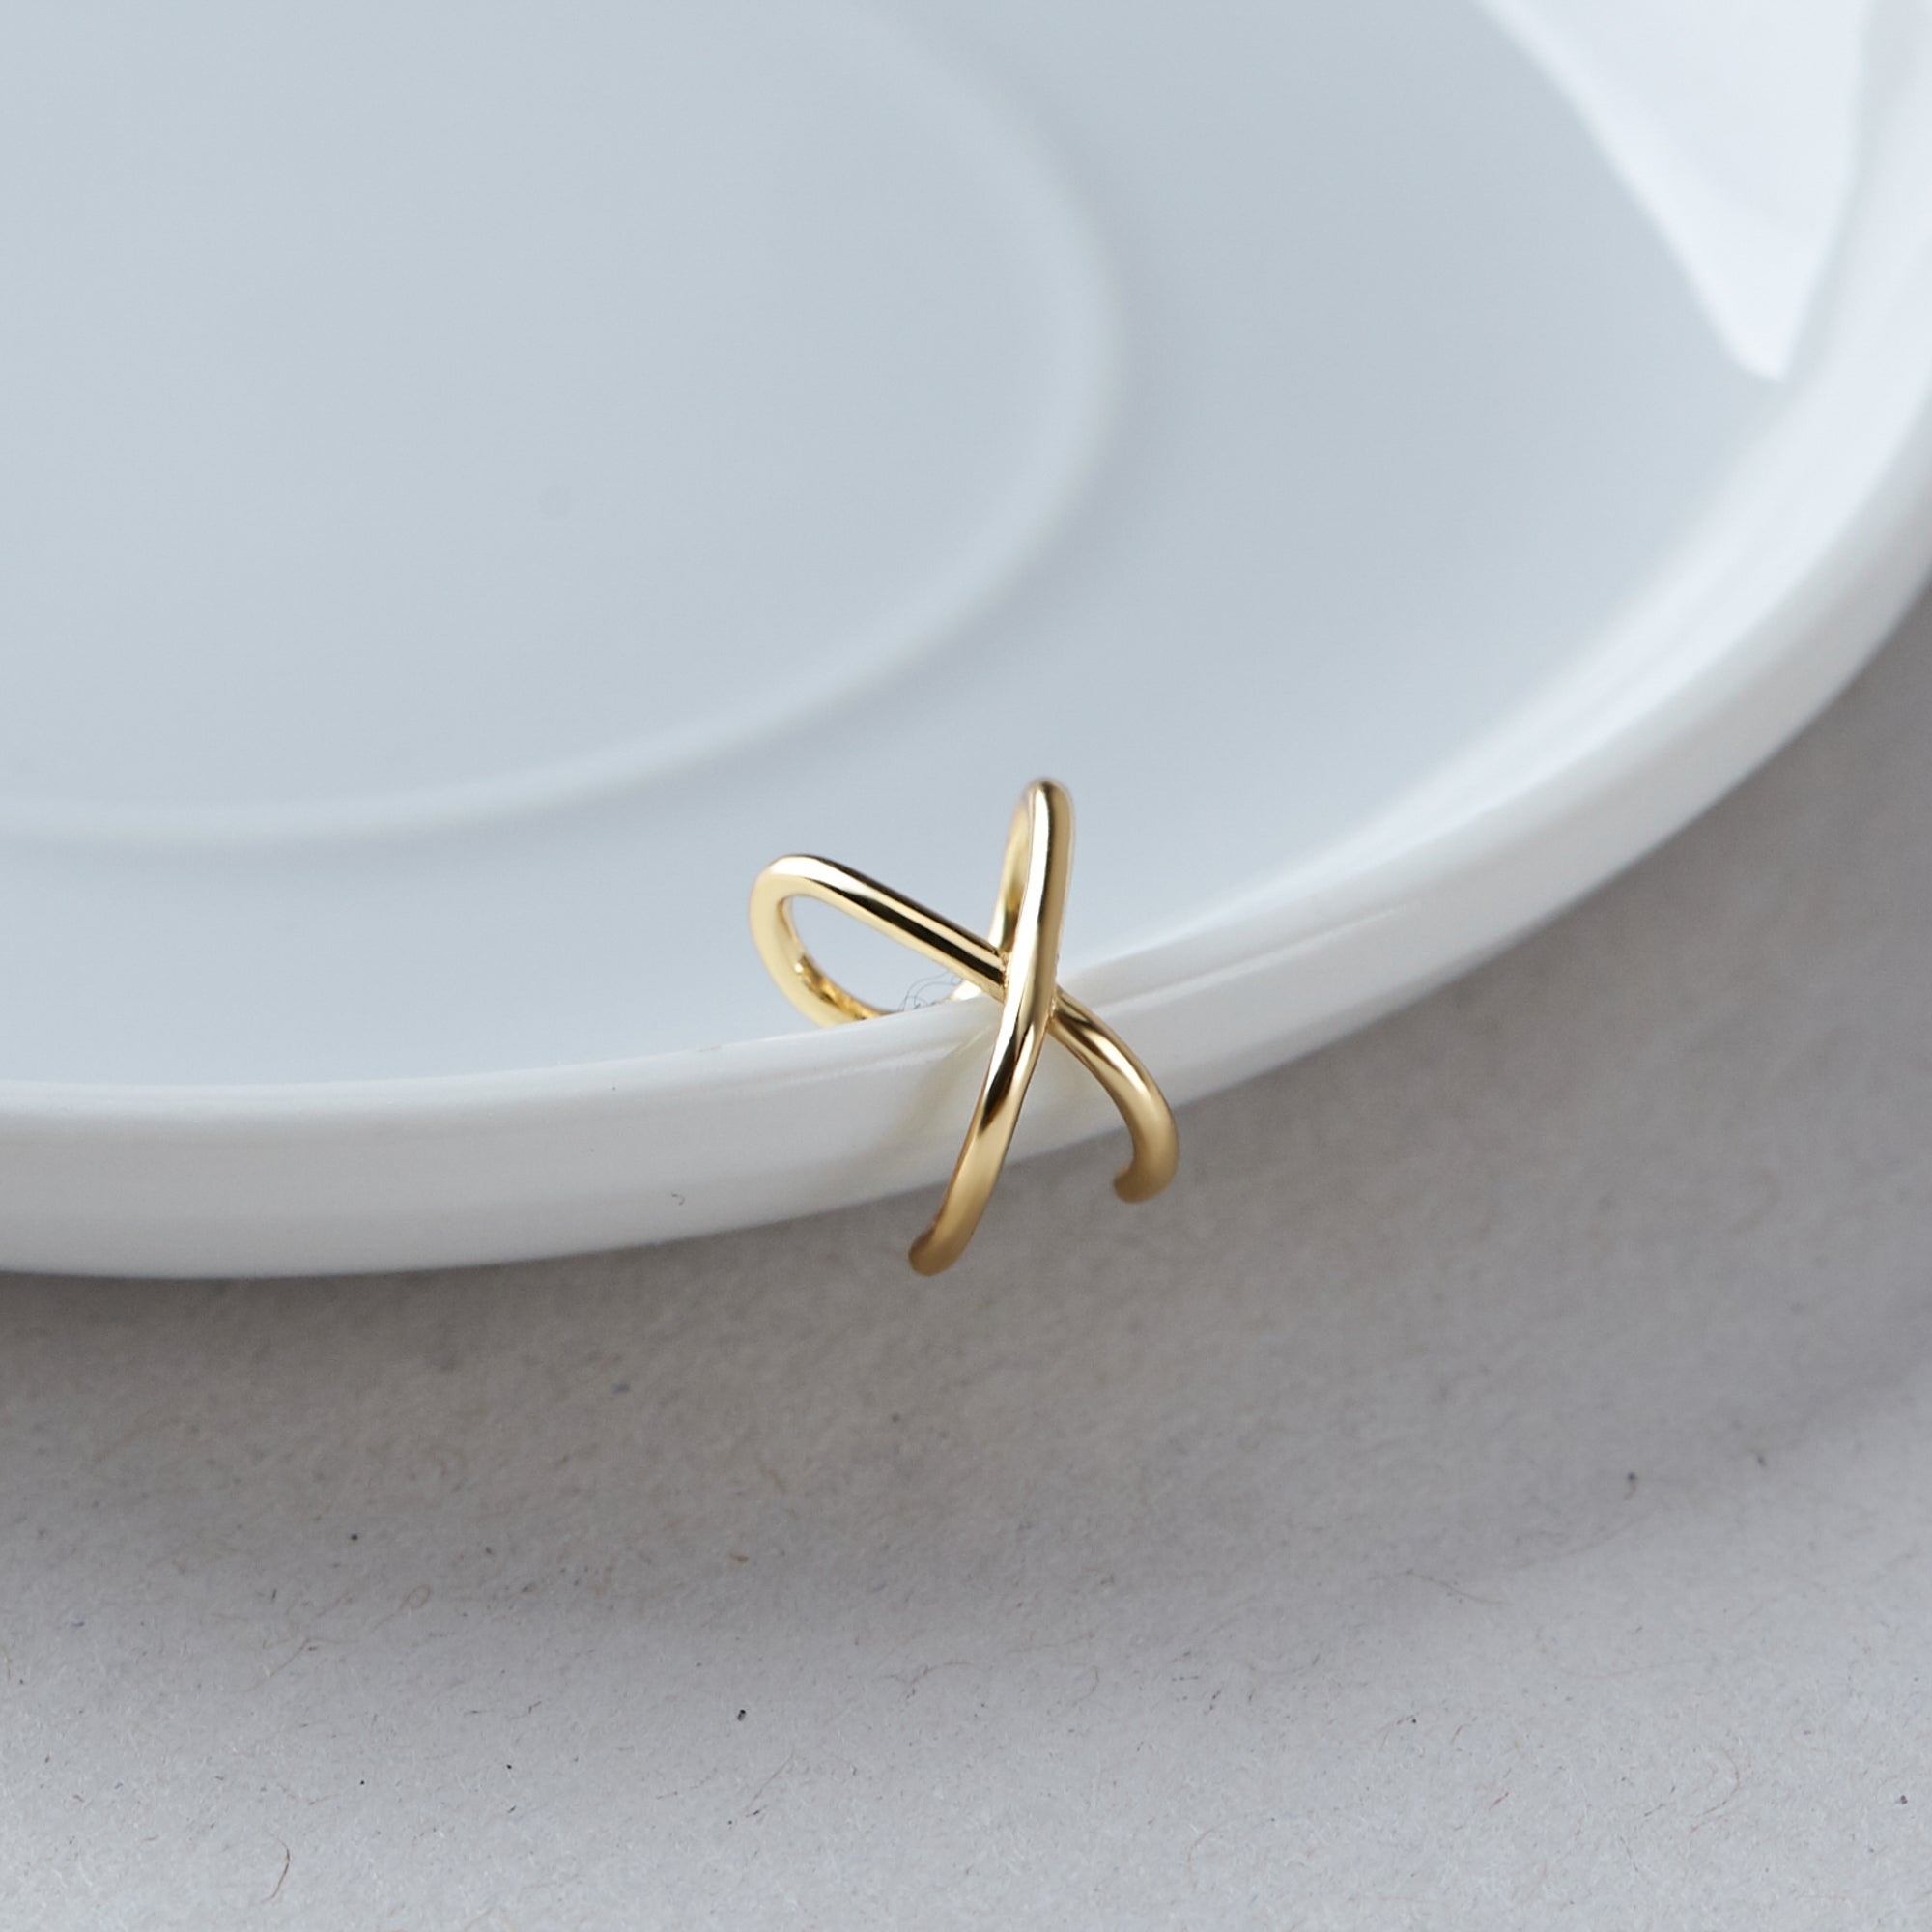 Criss Cross Ear Cuff - Sterling Silver, Available in Gold, Rose Gold, or Silver Bijou Her